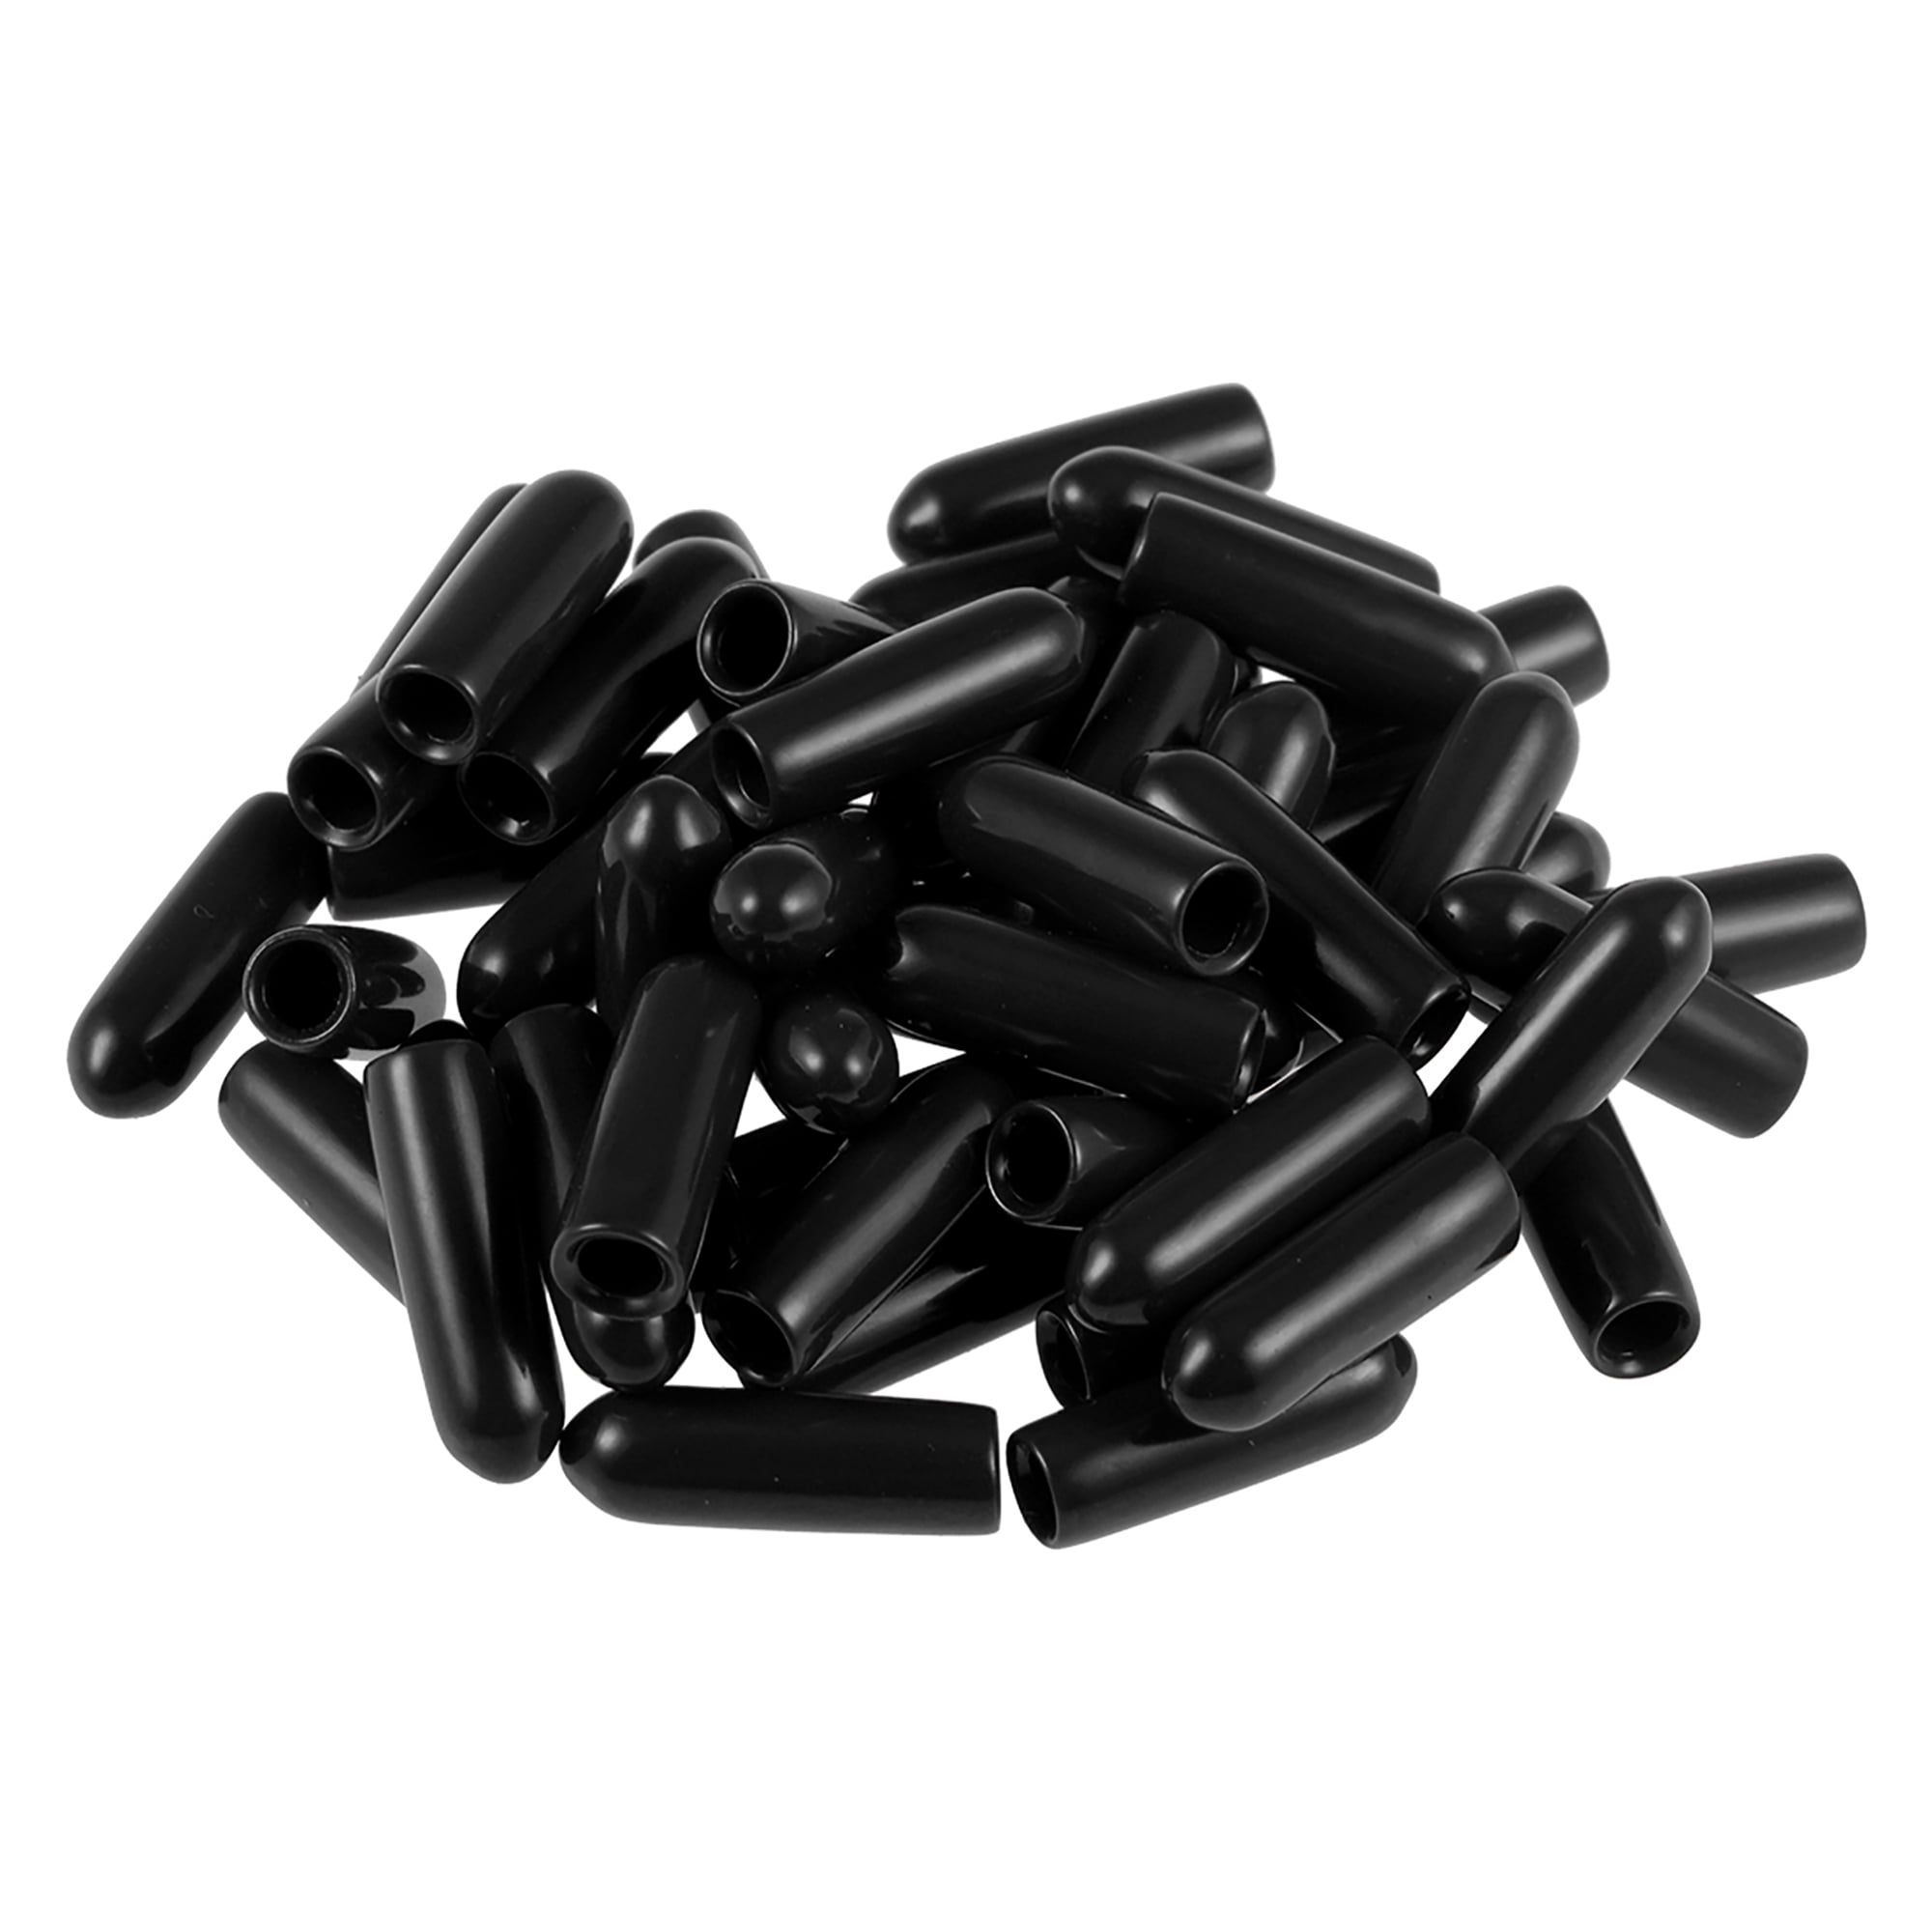 7.5mm ID Screw Thread Protectors Rubber Round end Cap Cover Black Flexible Tube caps Tube tip 100 Pieces 